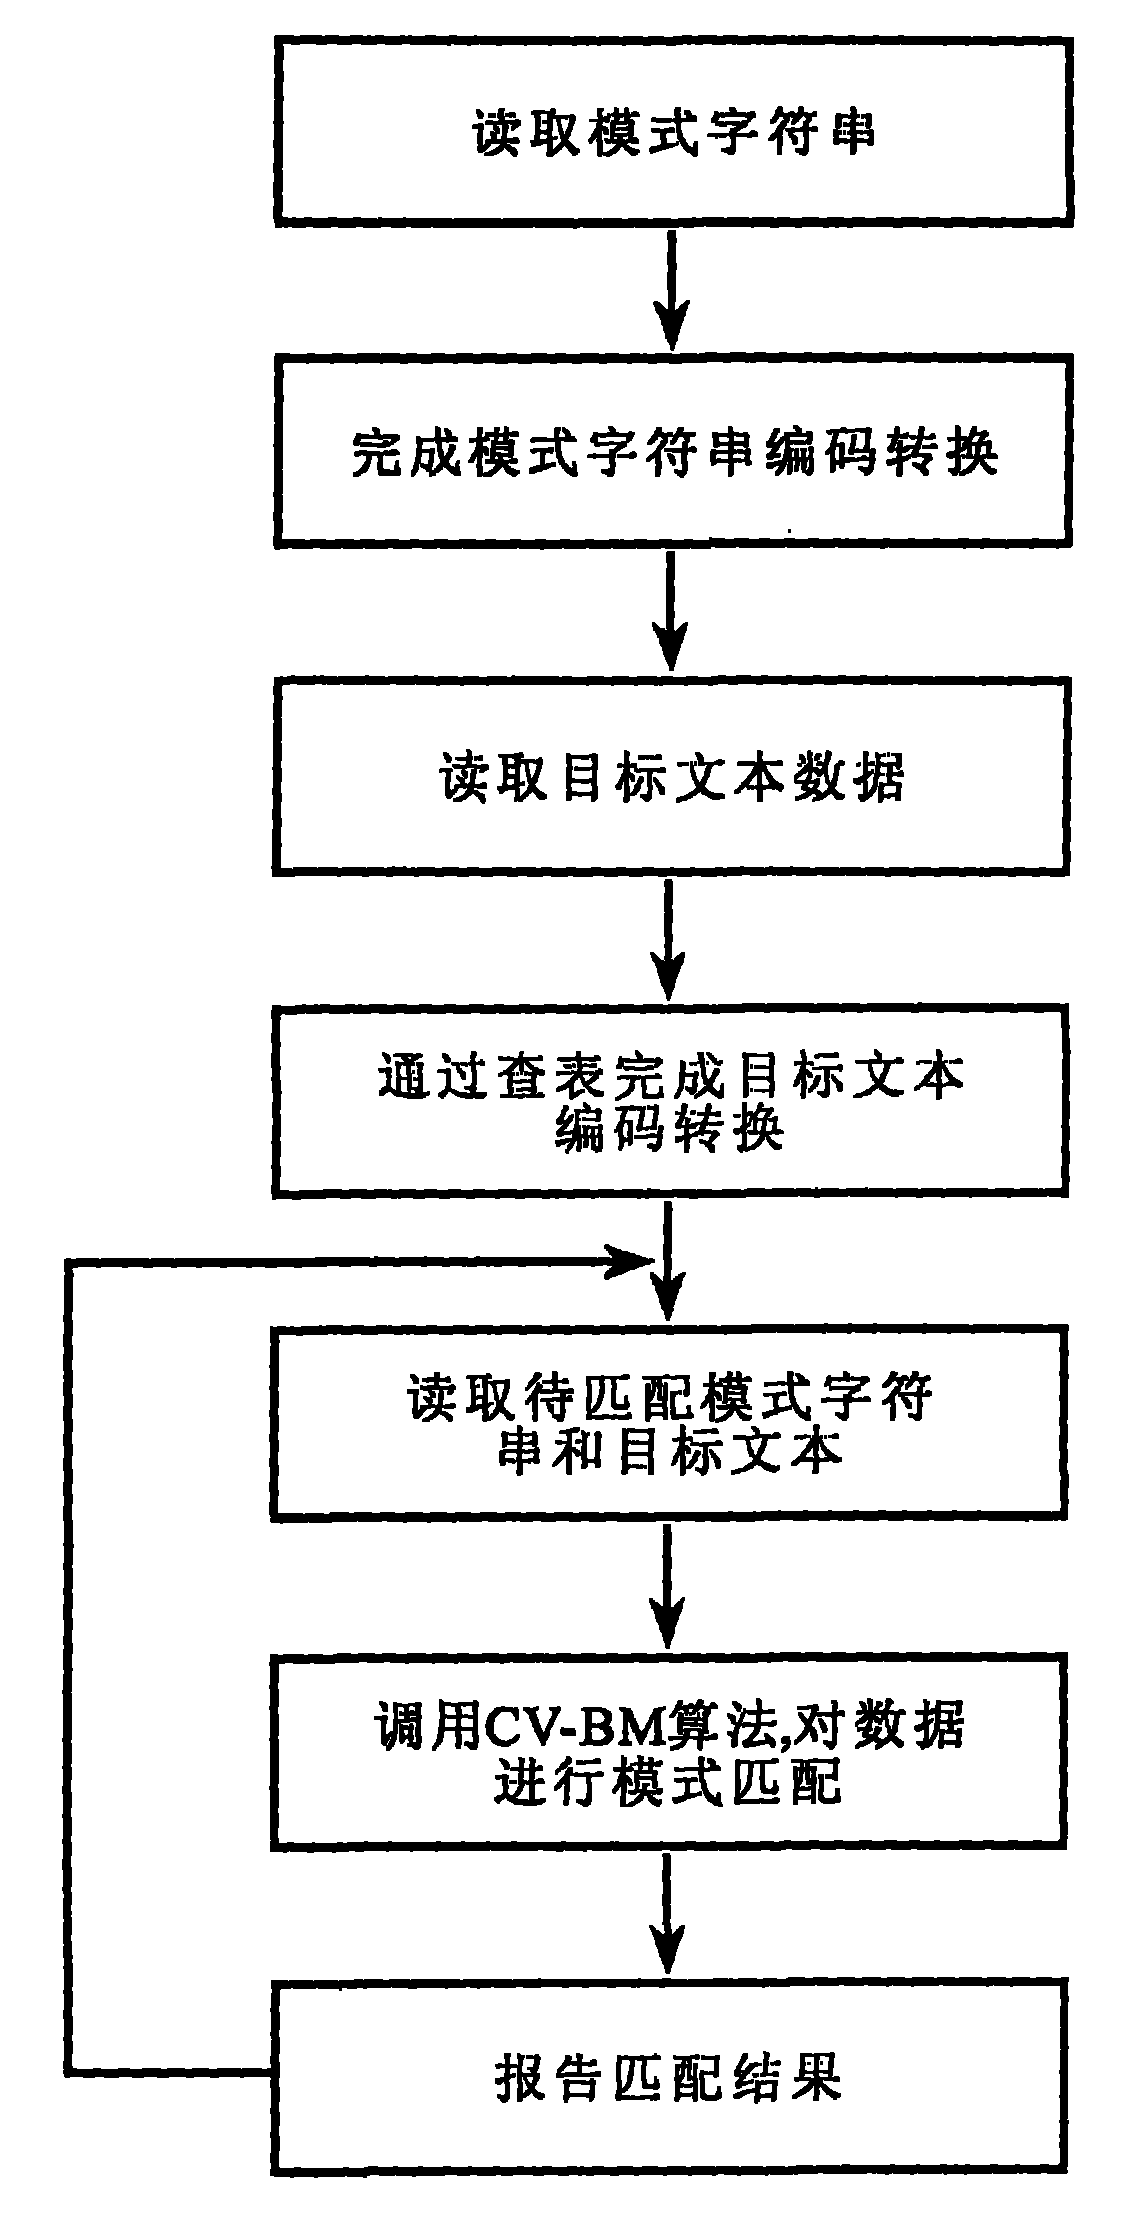 Chinese variation text matching recognition method